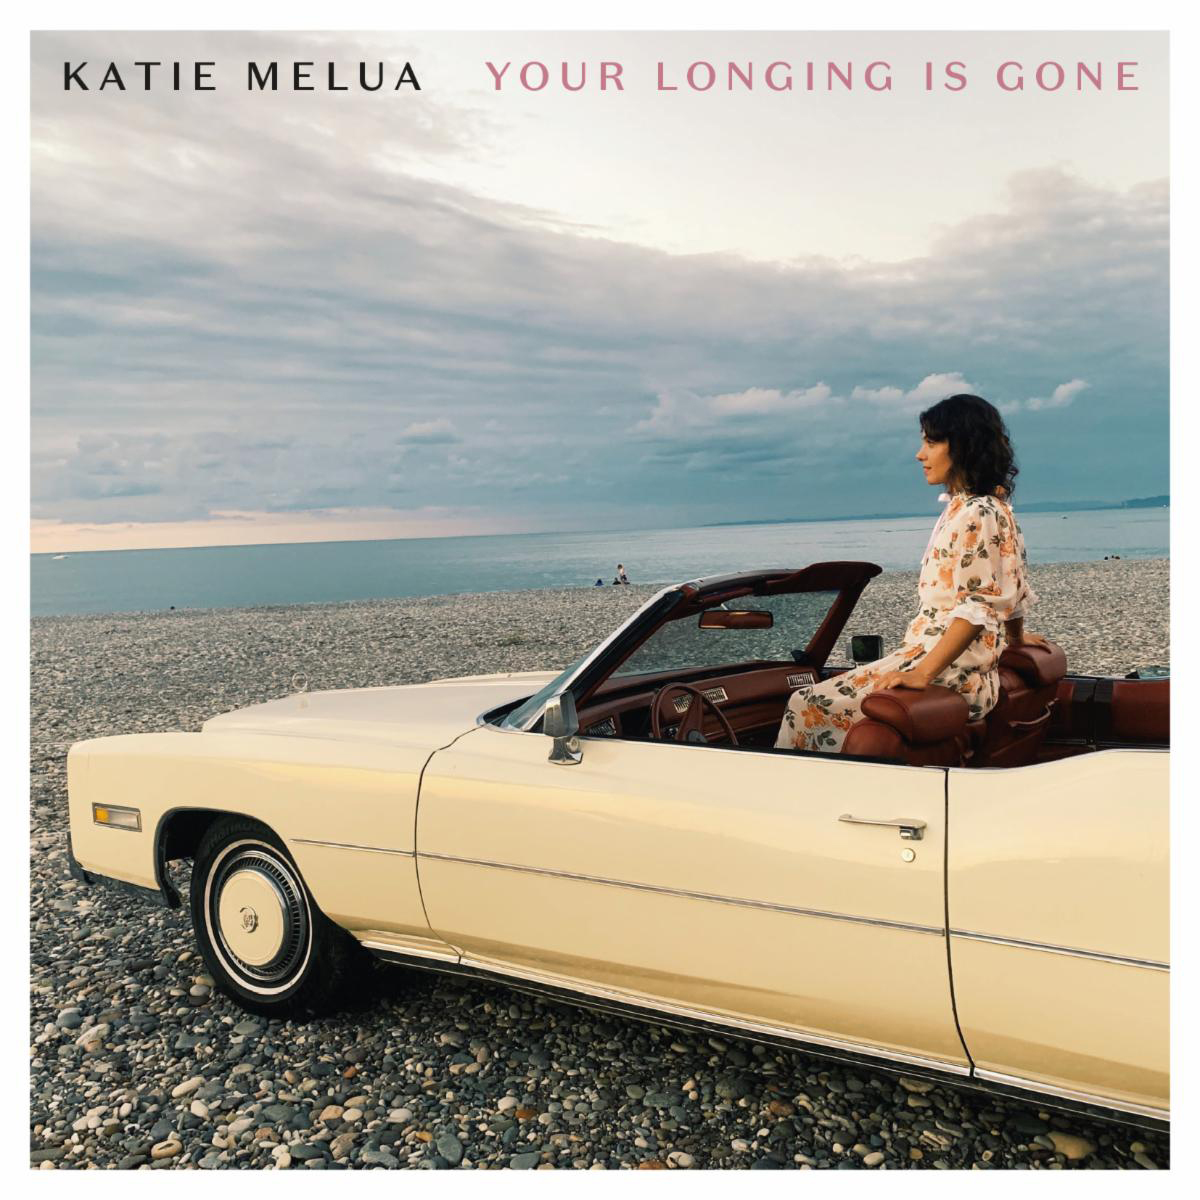 KATIE MELUA shares 'Your Longing Is Gone' from forthcoming record 'Album No.8' 